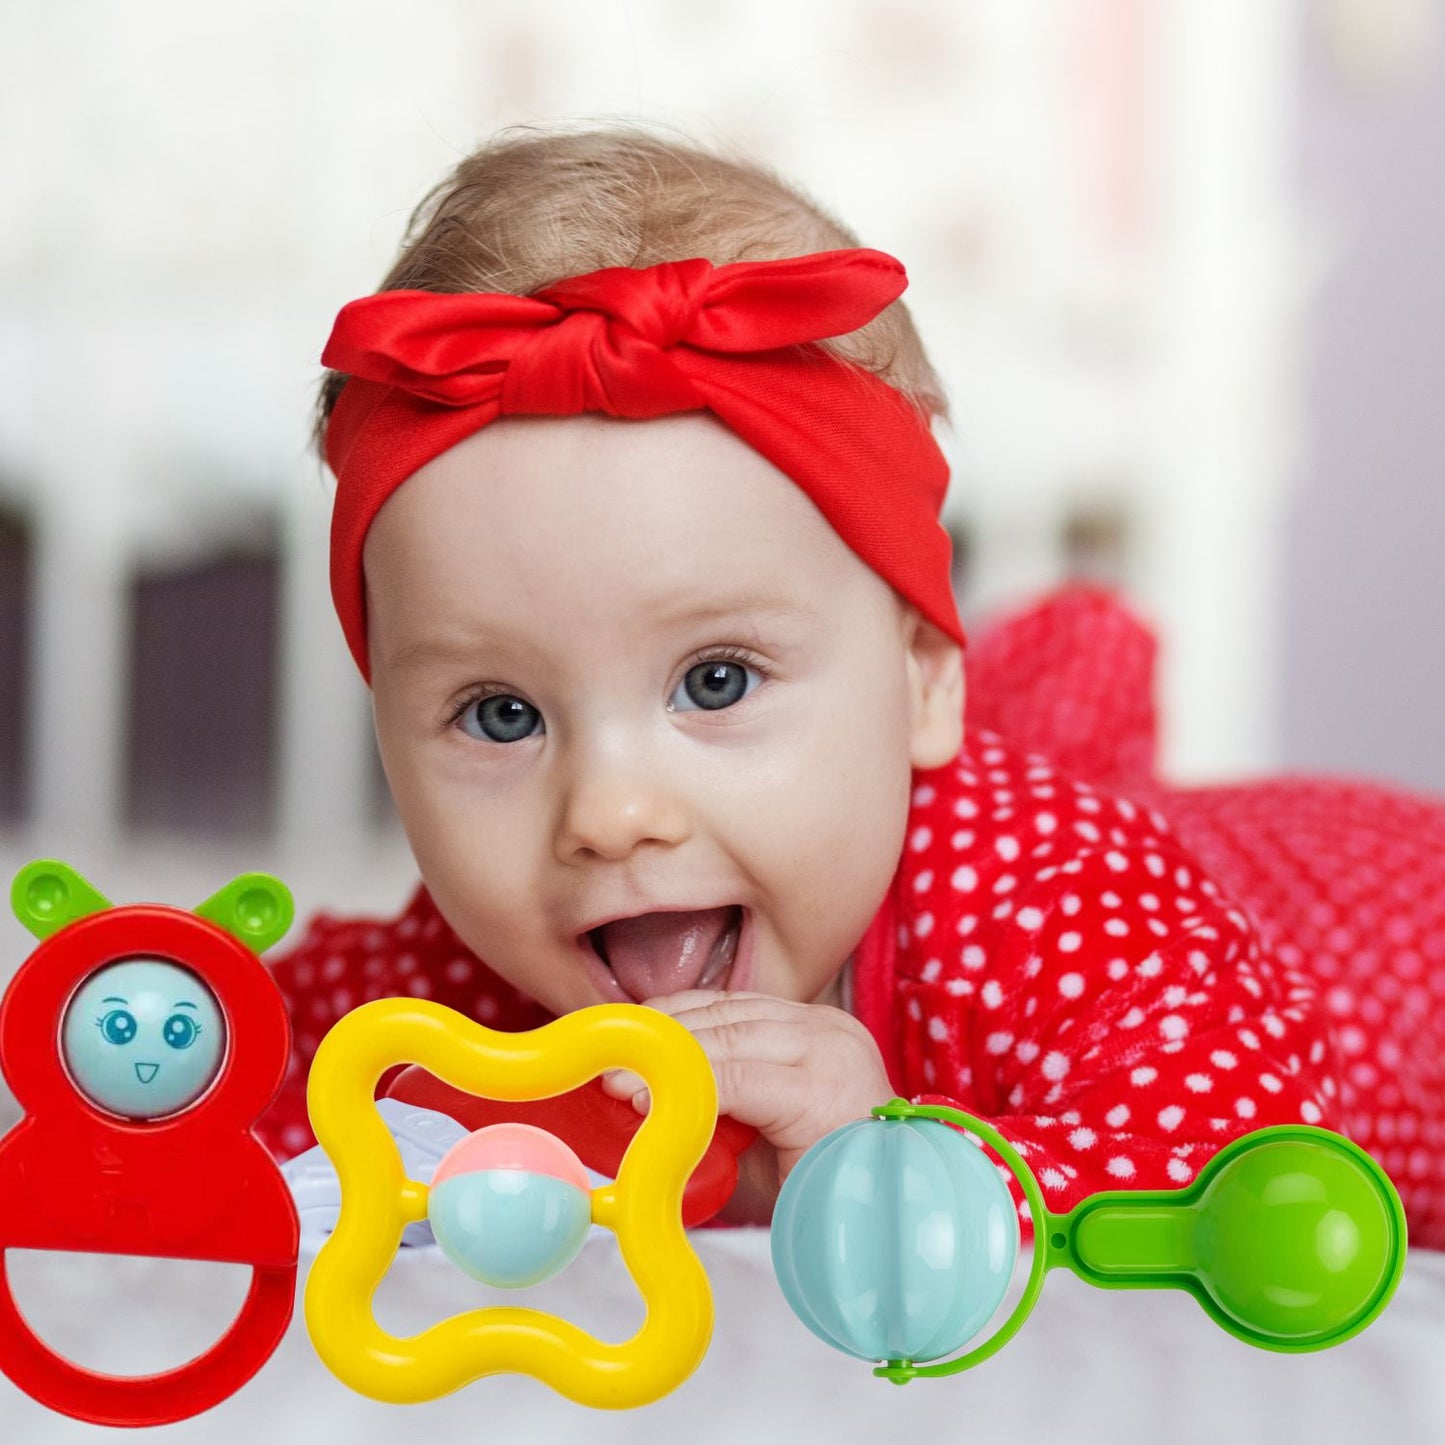 MM TOYS Newborn Baby Rattle Toy Set, Pack of 3, Non-Toxic, BPA Free, Suitable for 3+ Months - Multicolor